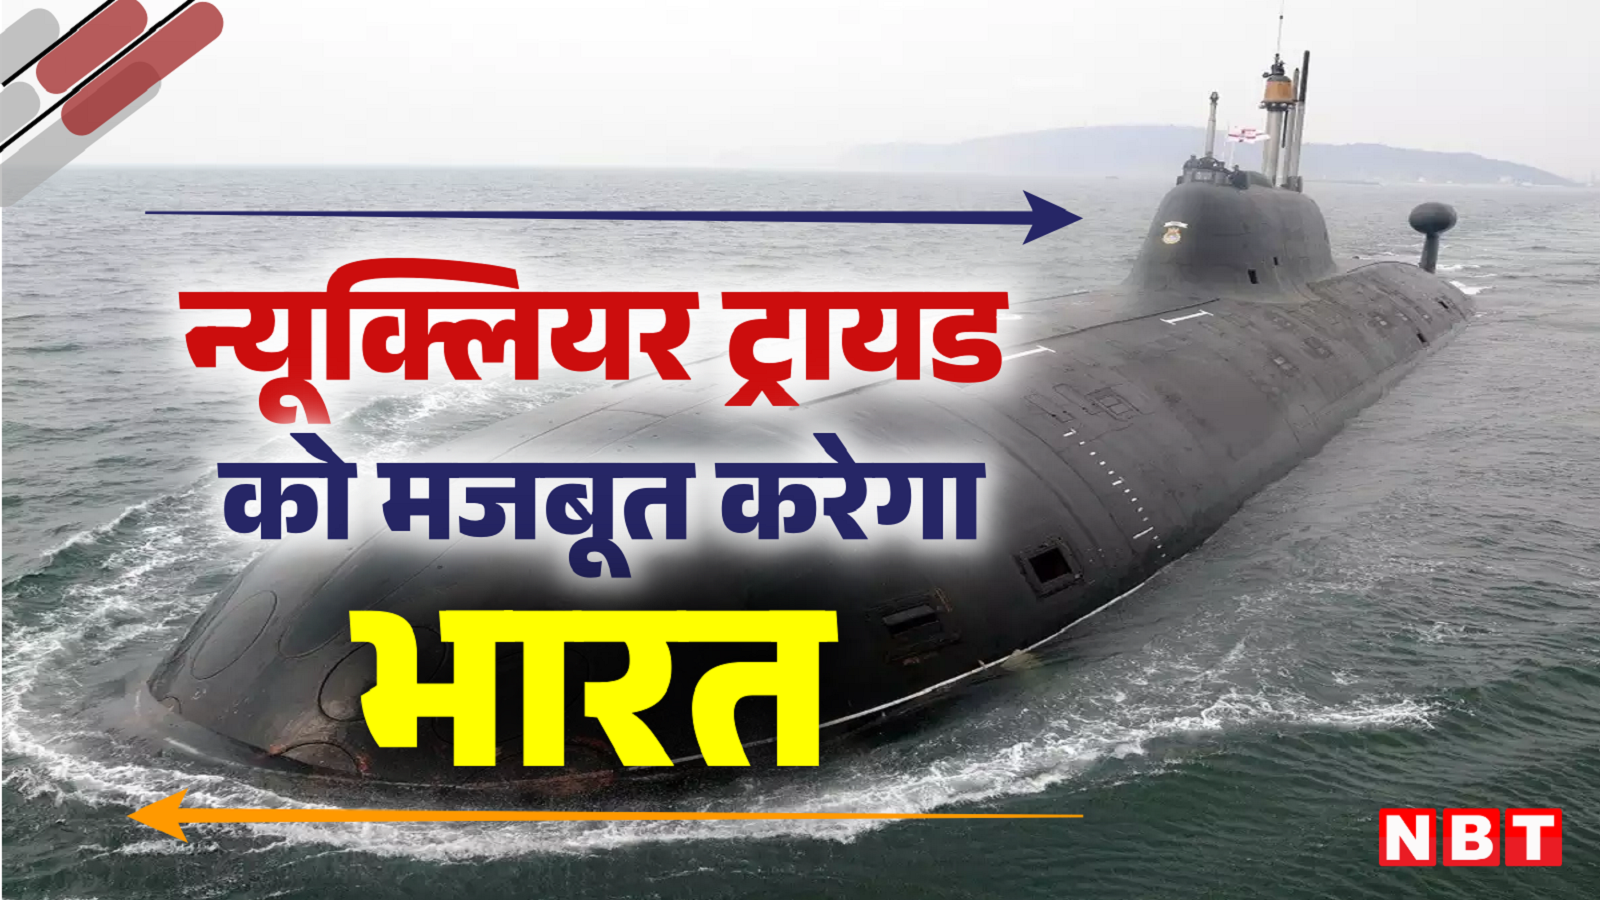 India will strengthen the nuclear triangle by launching the second nuclear submarine, concern over revelations on China in SIPRI report